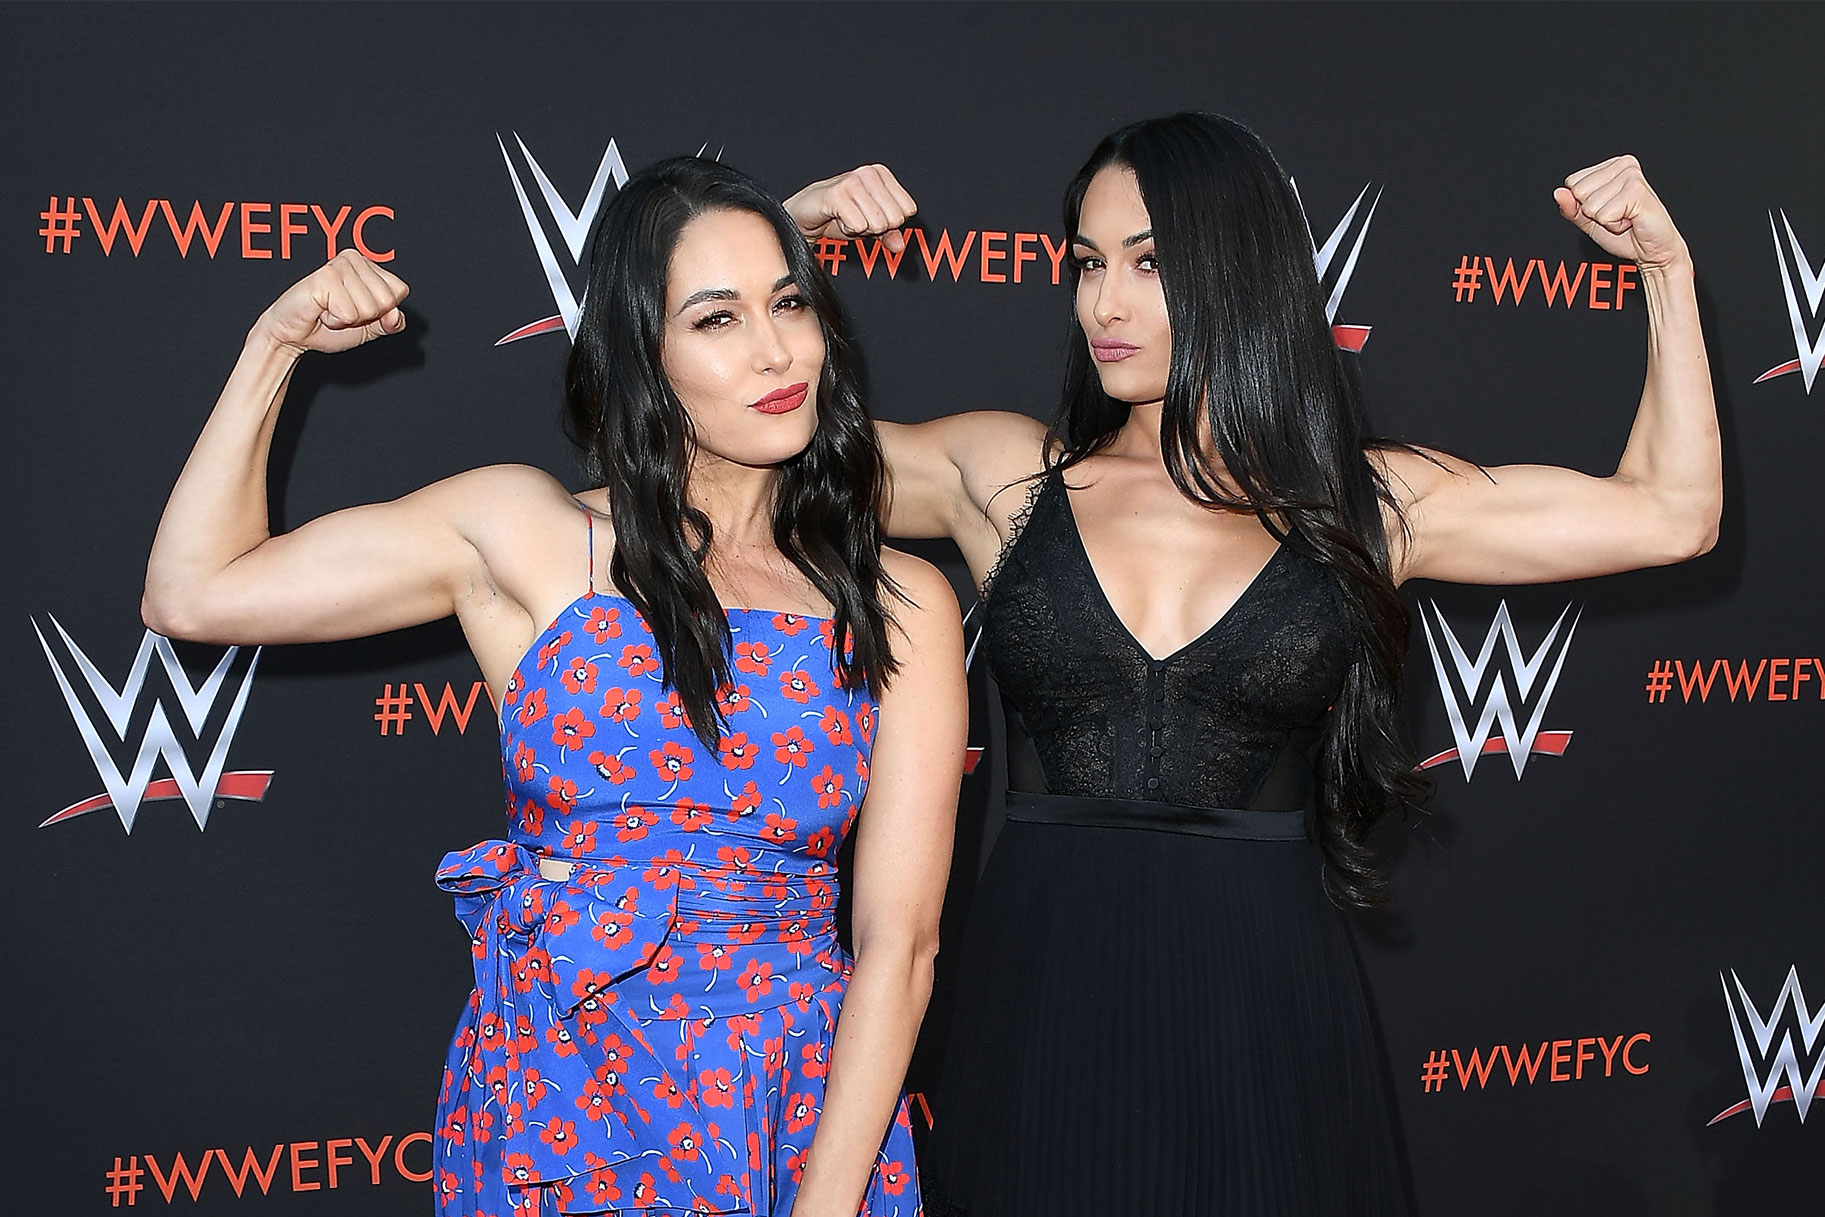 Bella Twins flexing their muscles on a WWE red carpet